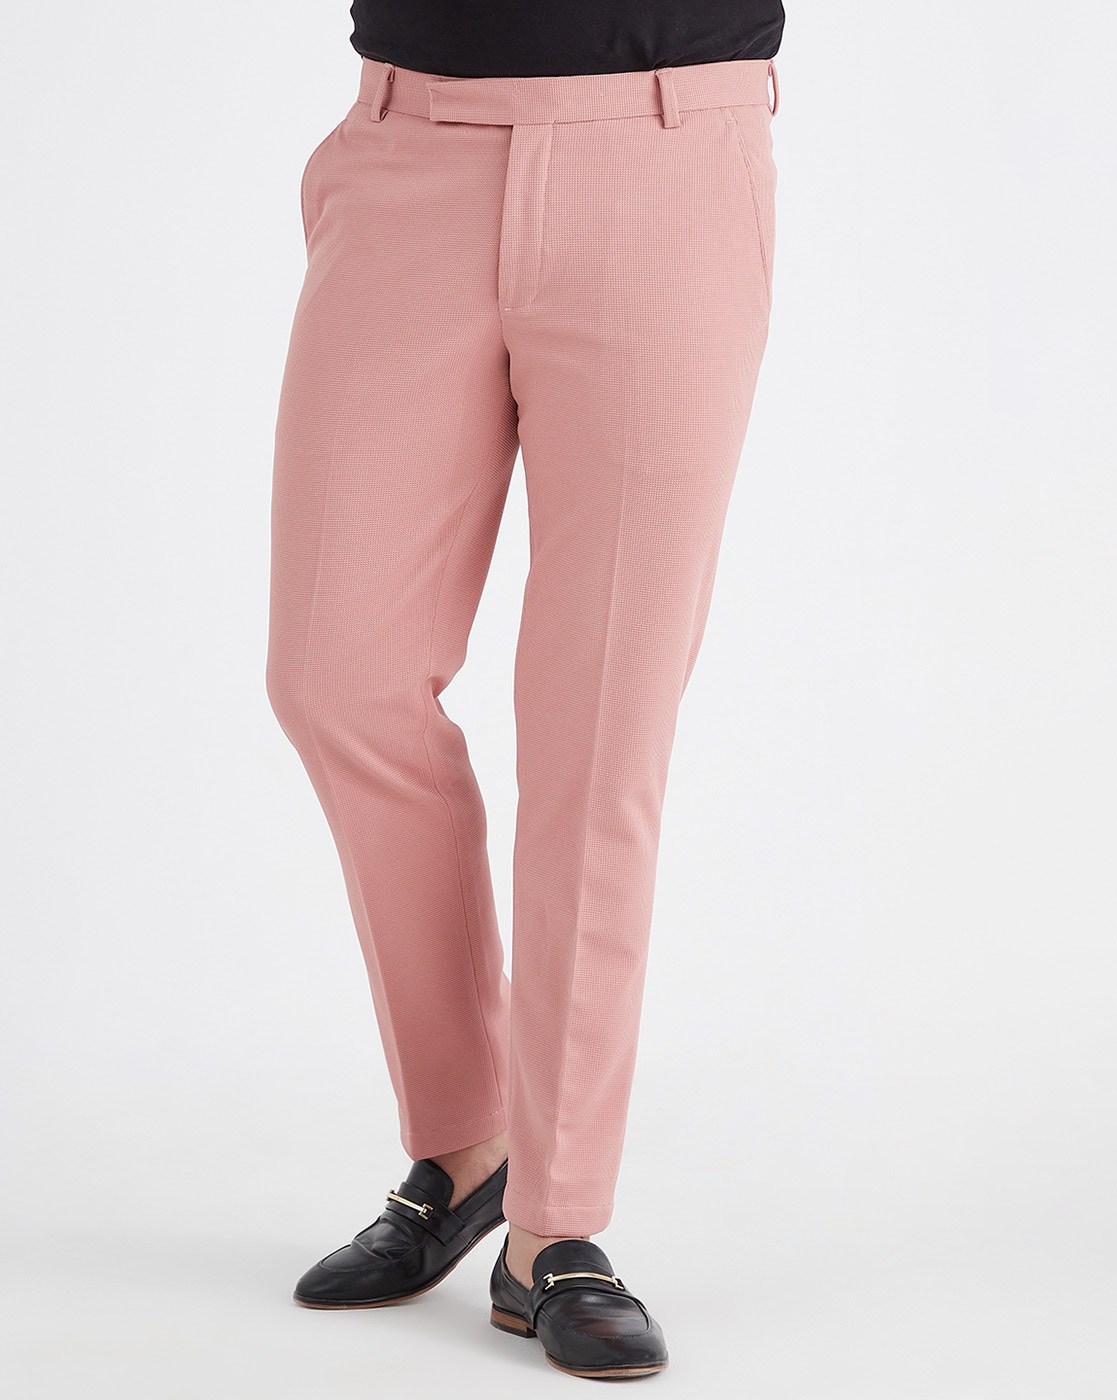 Buy Peach Trousers & Pants for Men by SON OF A NOBLE Online | Ajio.com